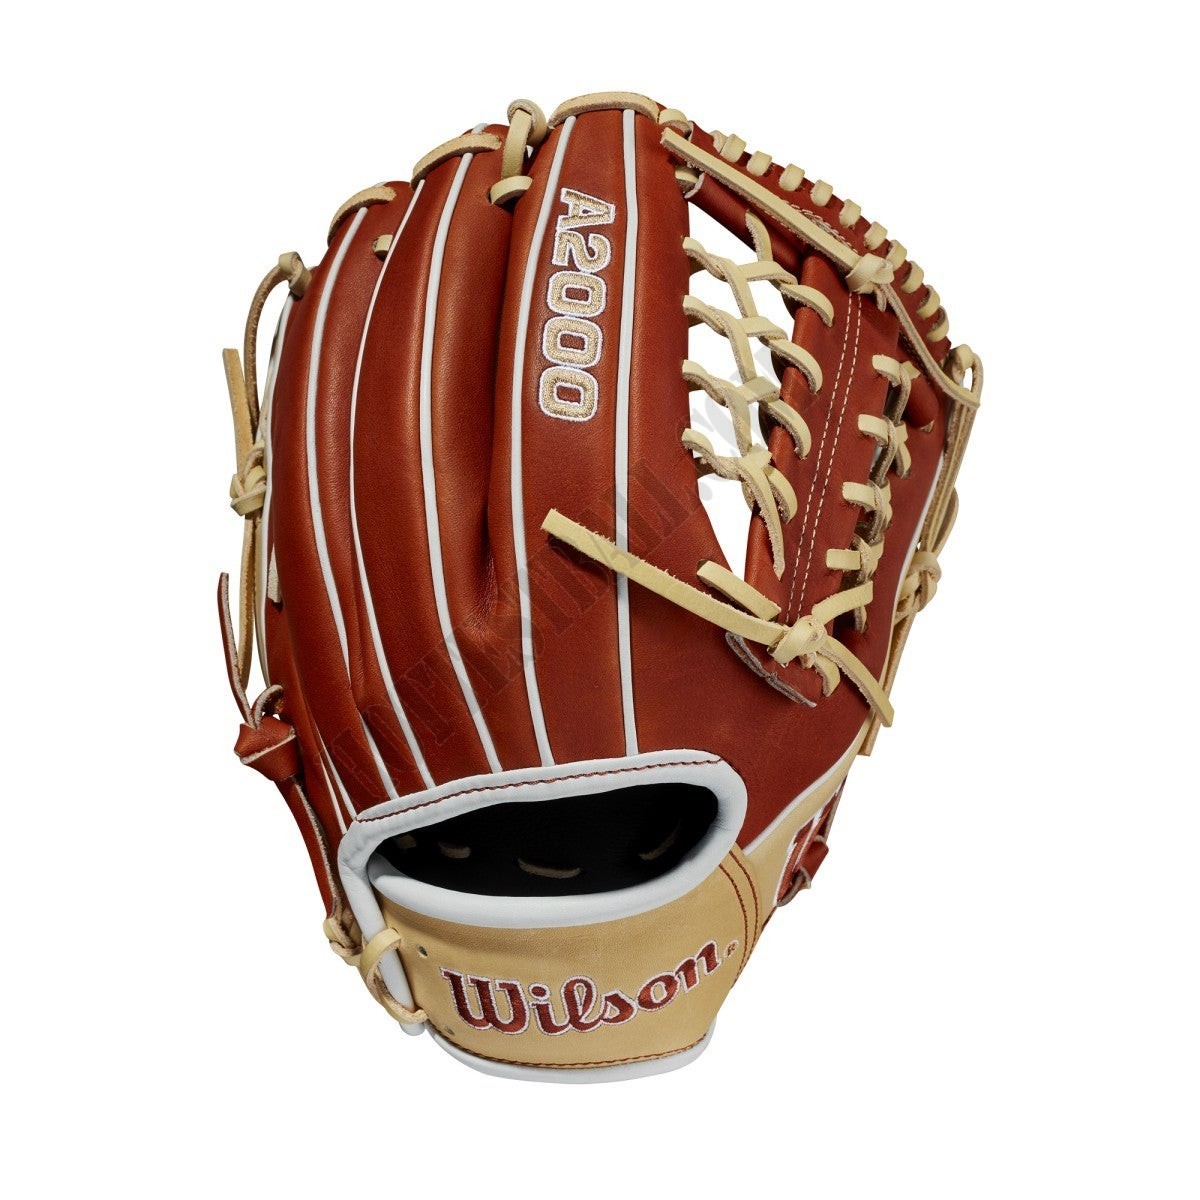 2021 A2000 1789 11.5" Utility Baseball Glove ● Wilson Promotions - -1